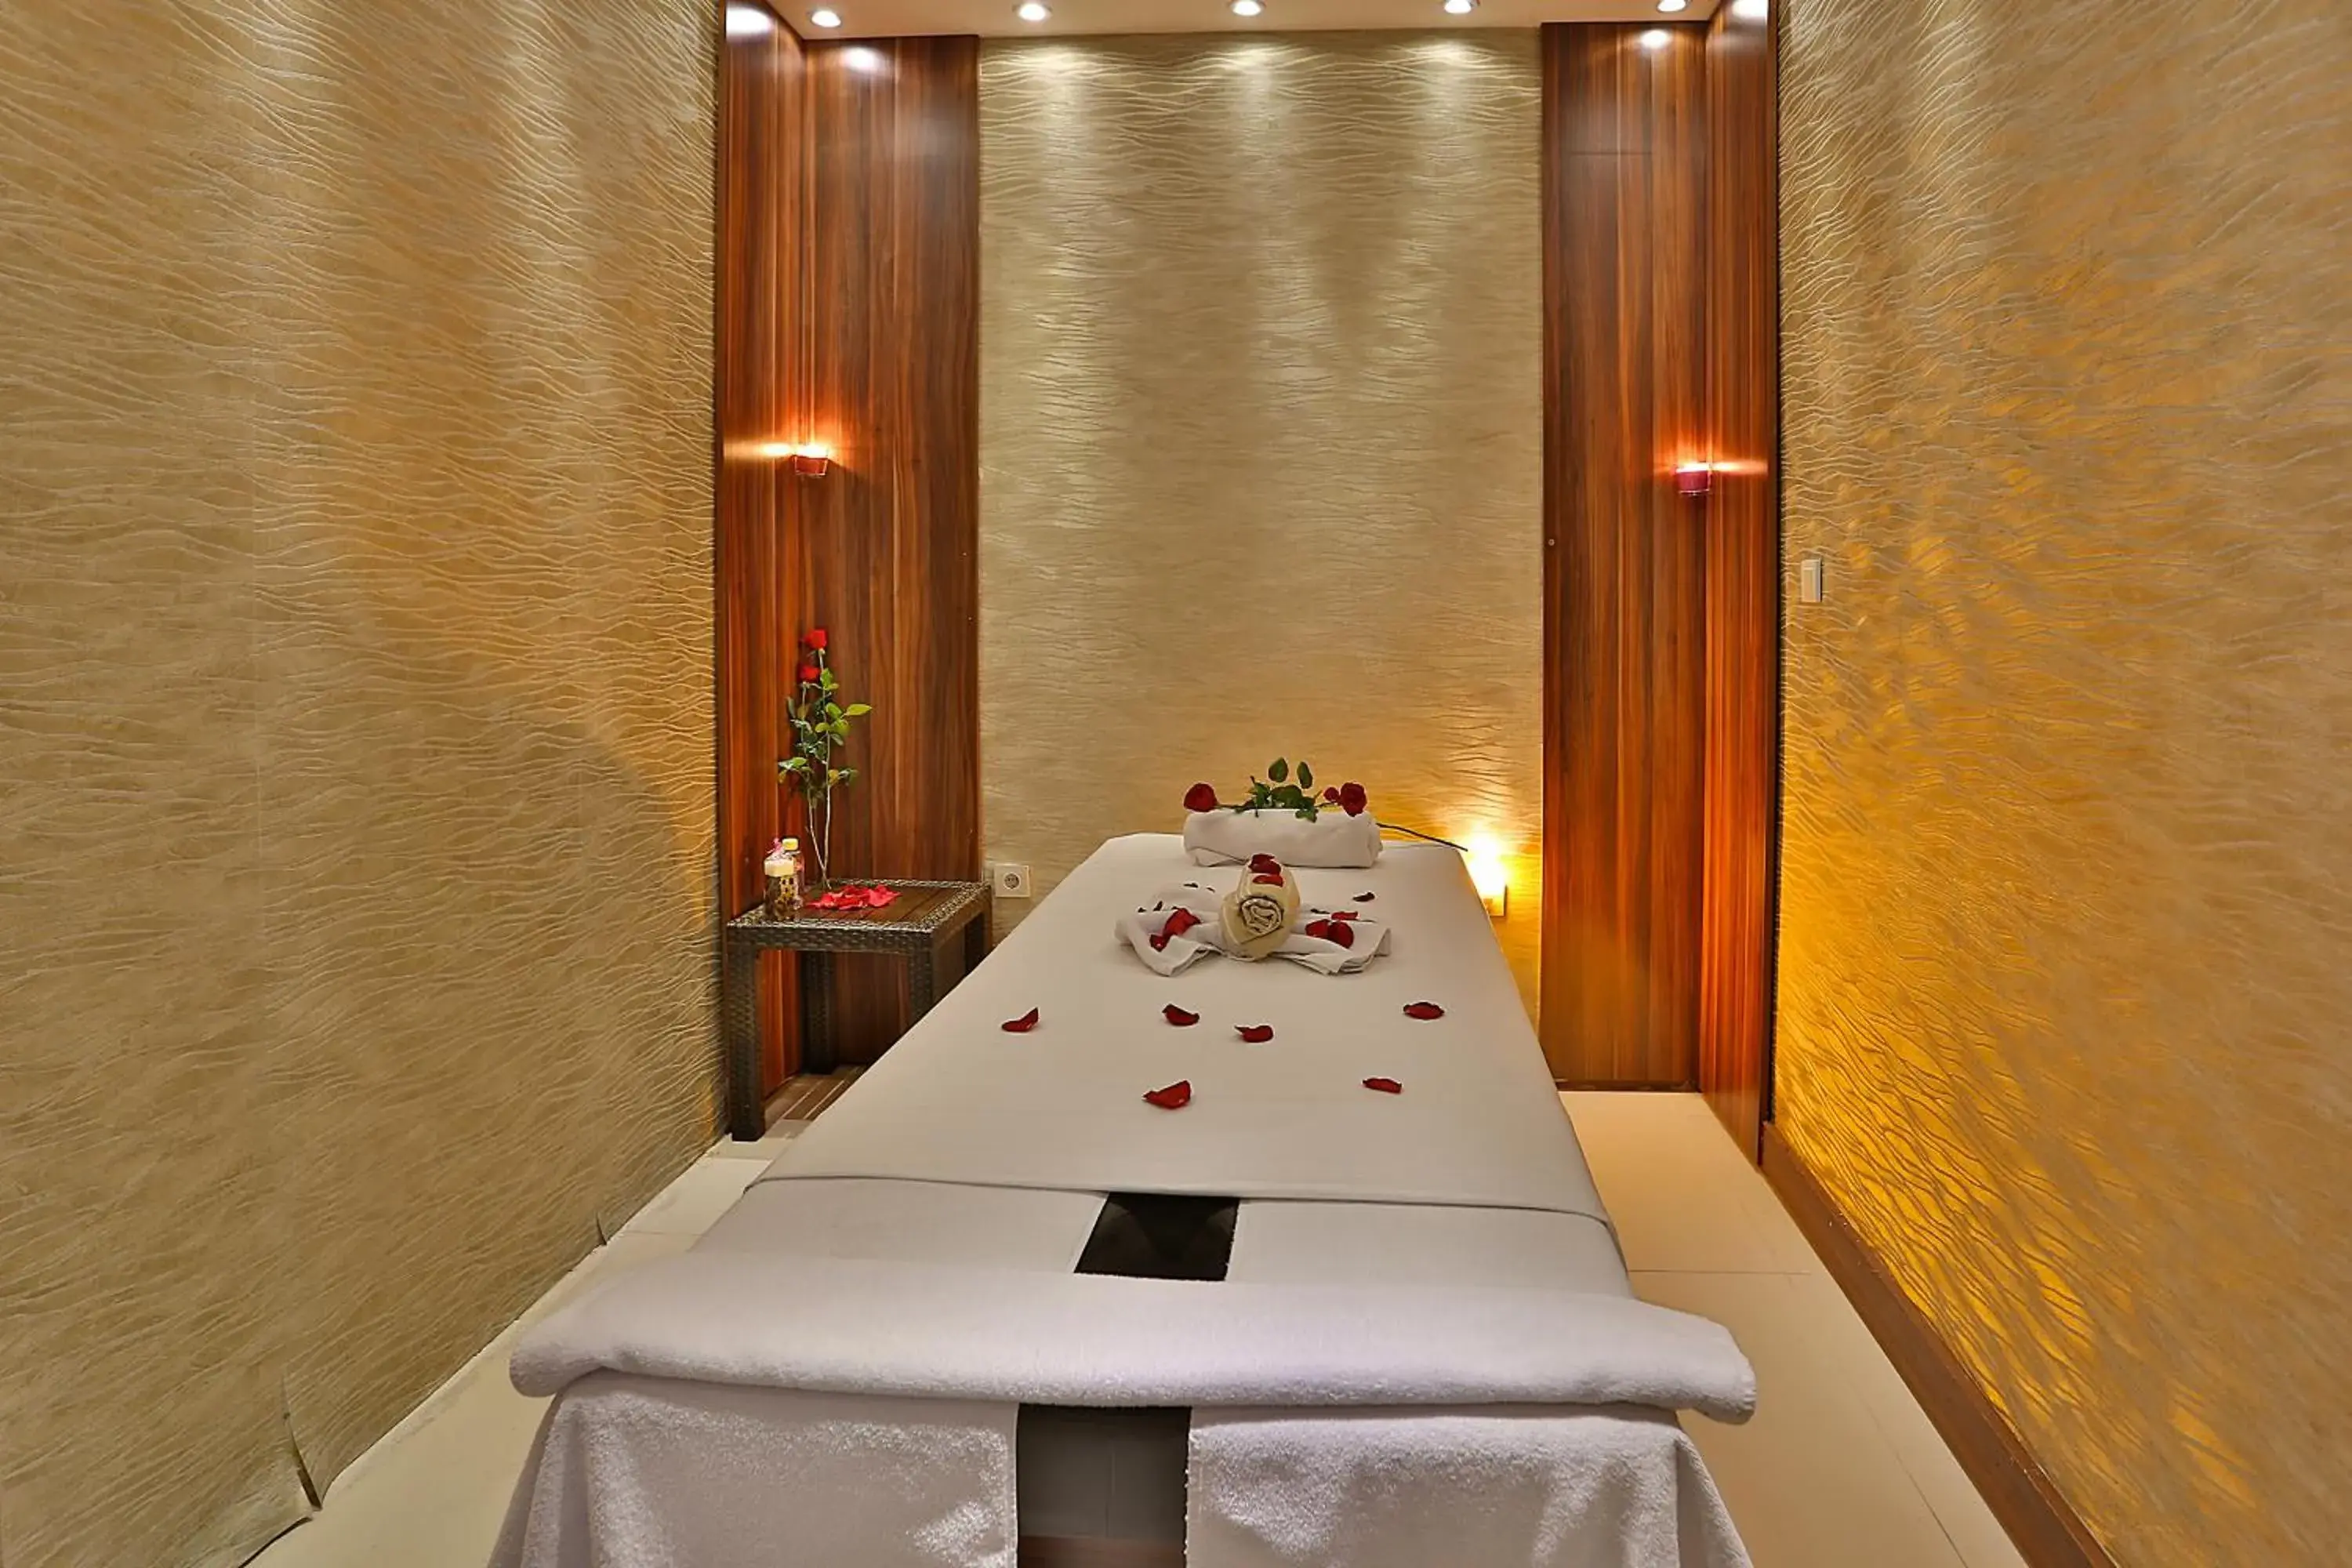 Area and facilities, Spa/Wellness in Grand Madrid Hotel